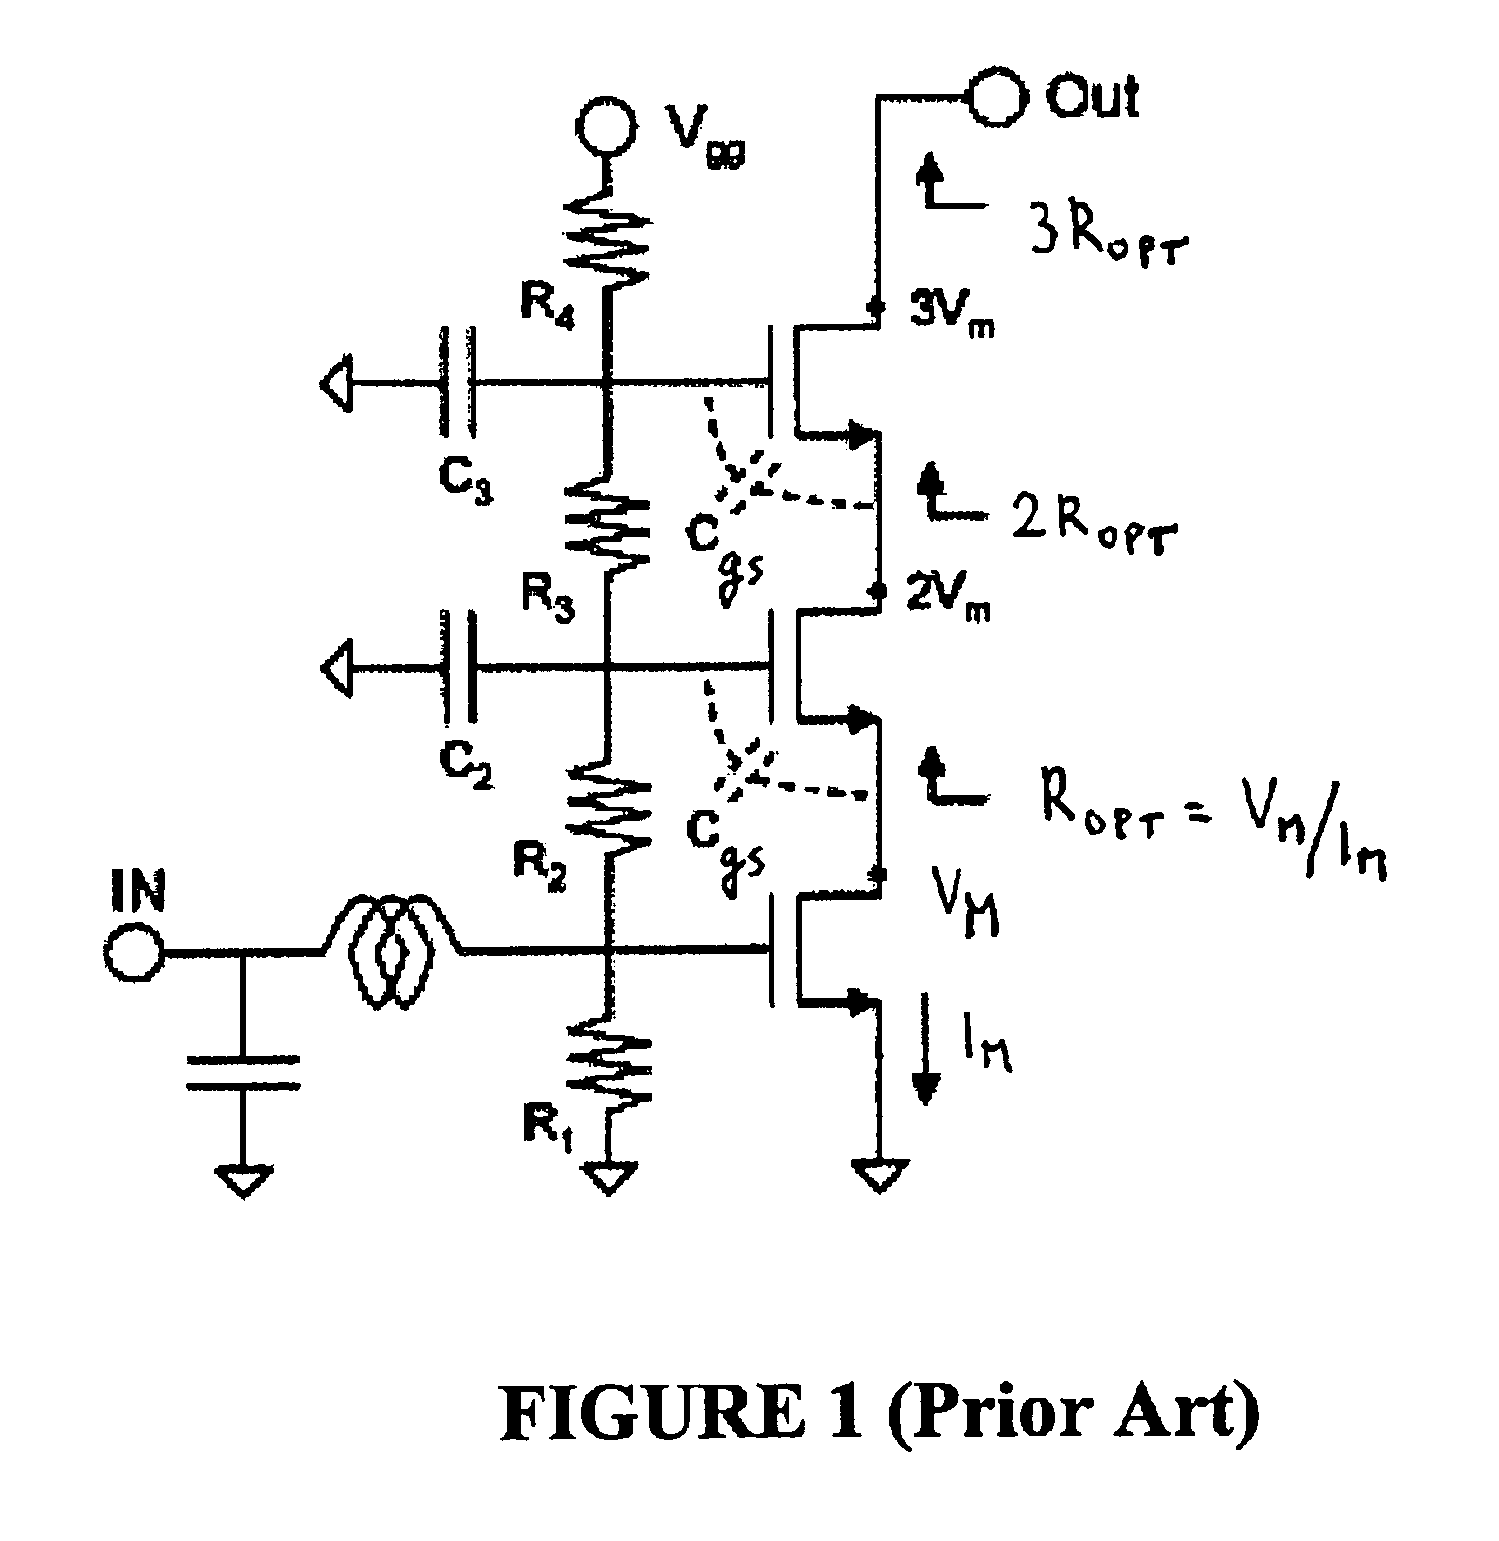 Stacked linear power amplifier with capacitor feedback and resistor isolation